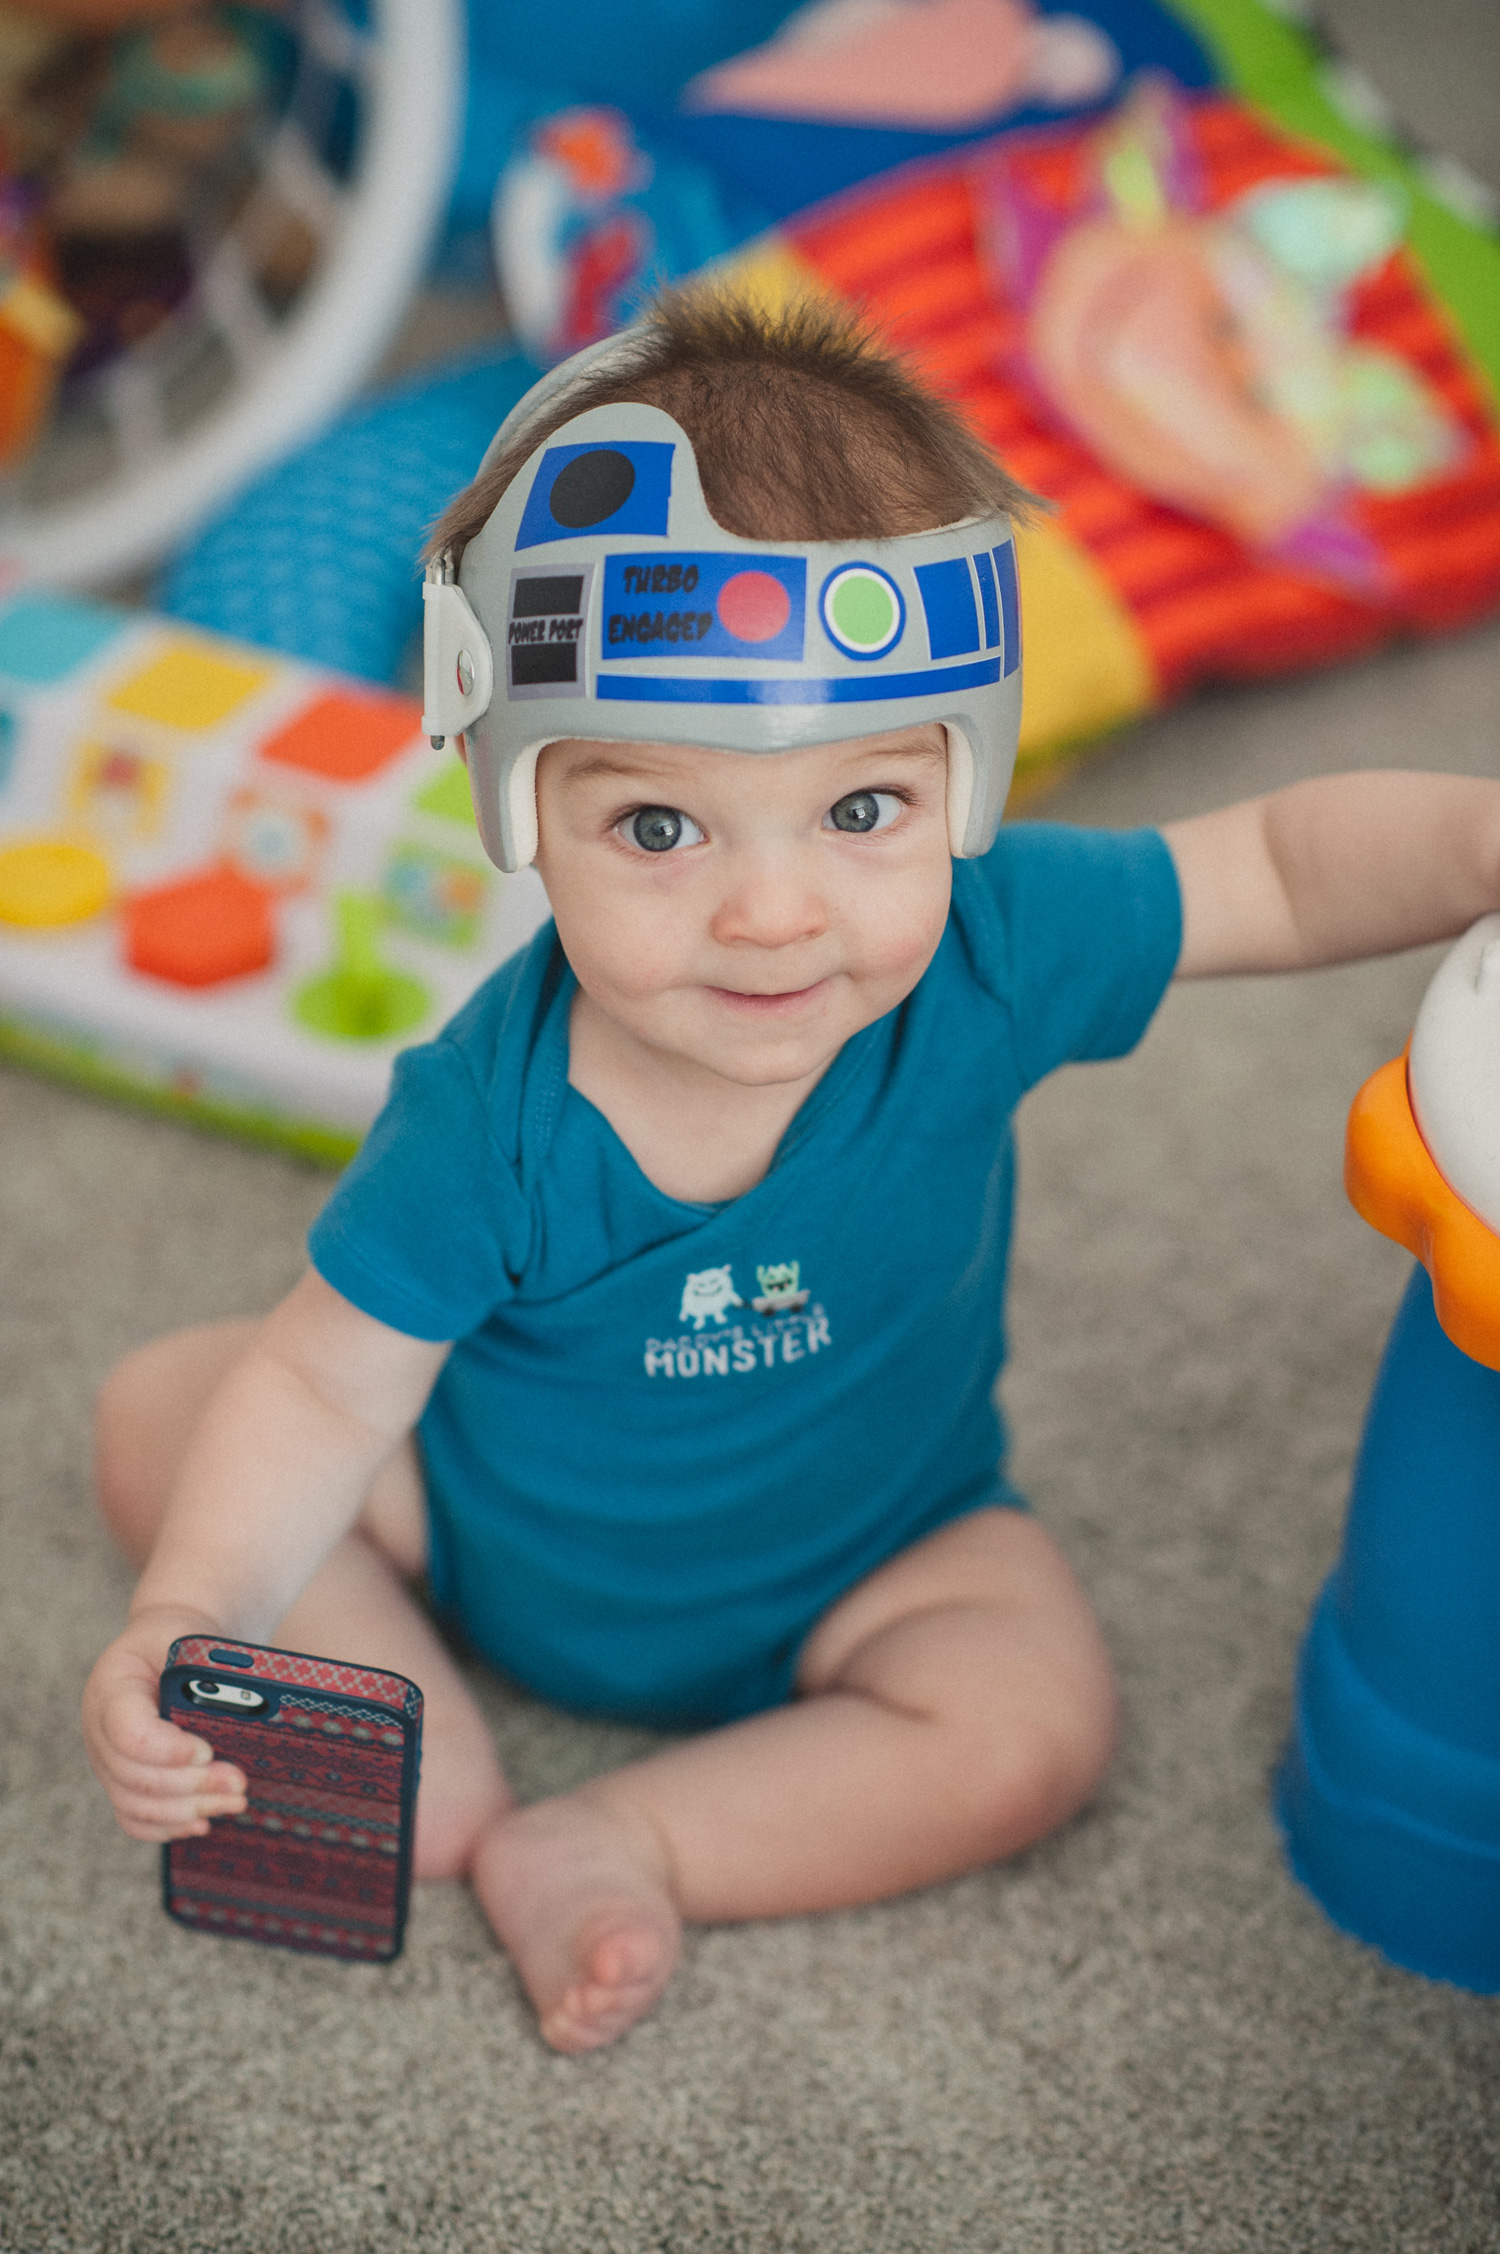 Baby with cranial helmet decorated like R2D2 from Star Wars